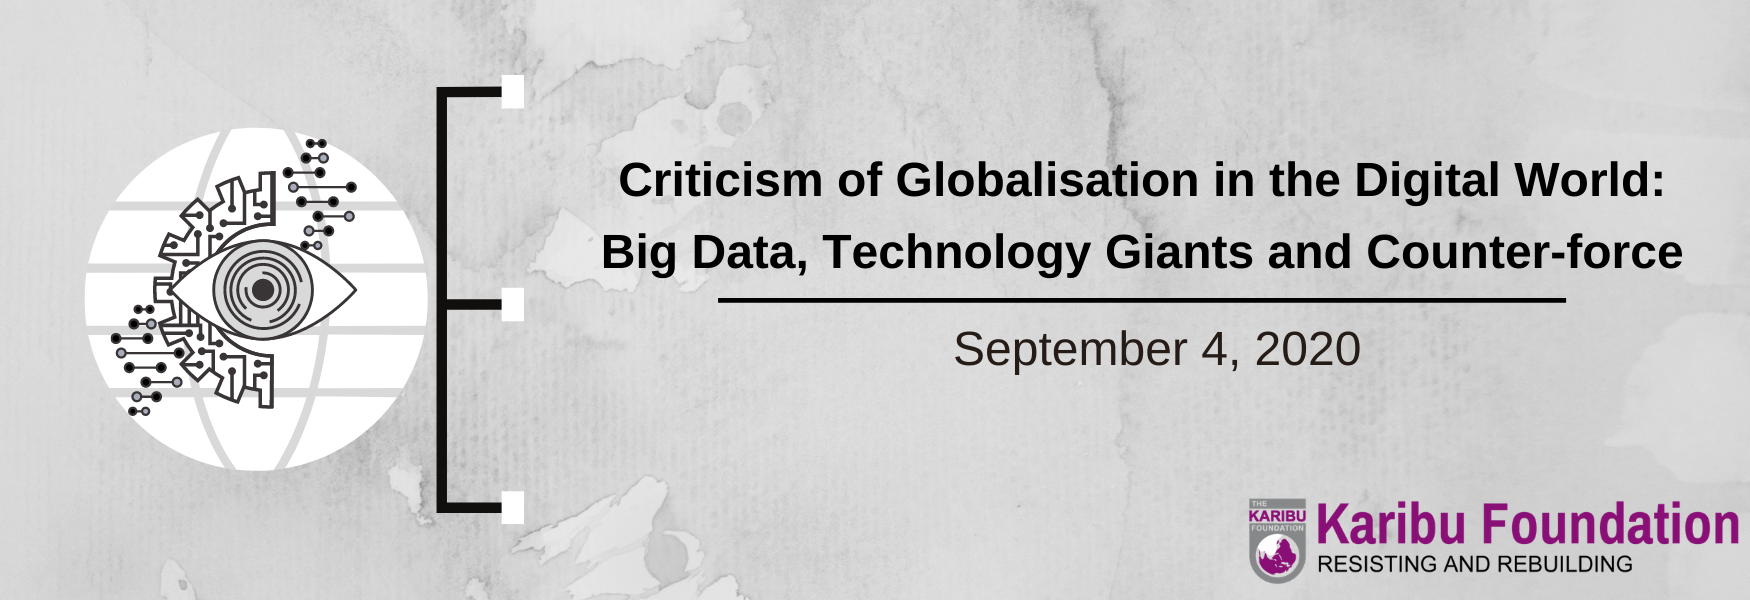 Criticism of Globalisation in the Digital World: Big Data, Technology Giants and Counter-force